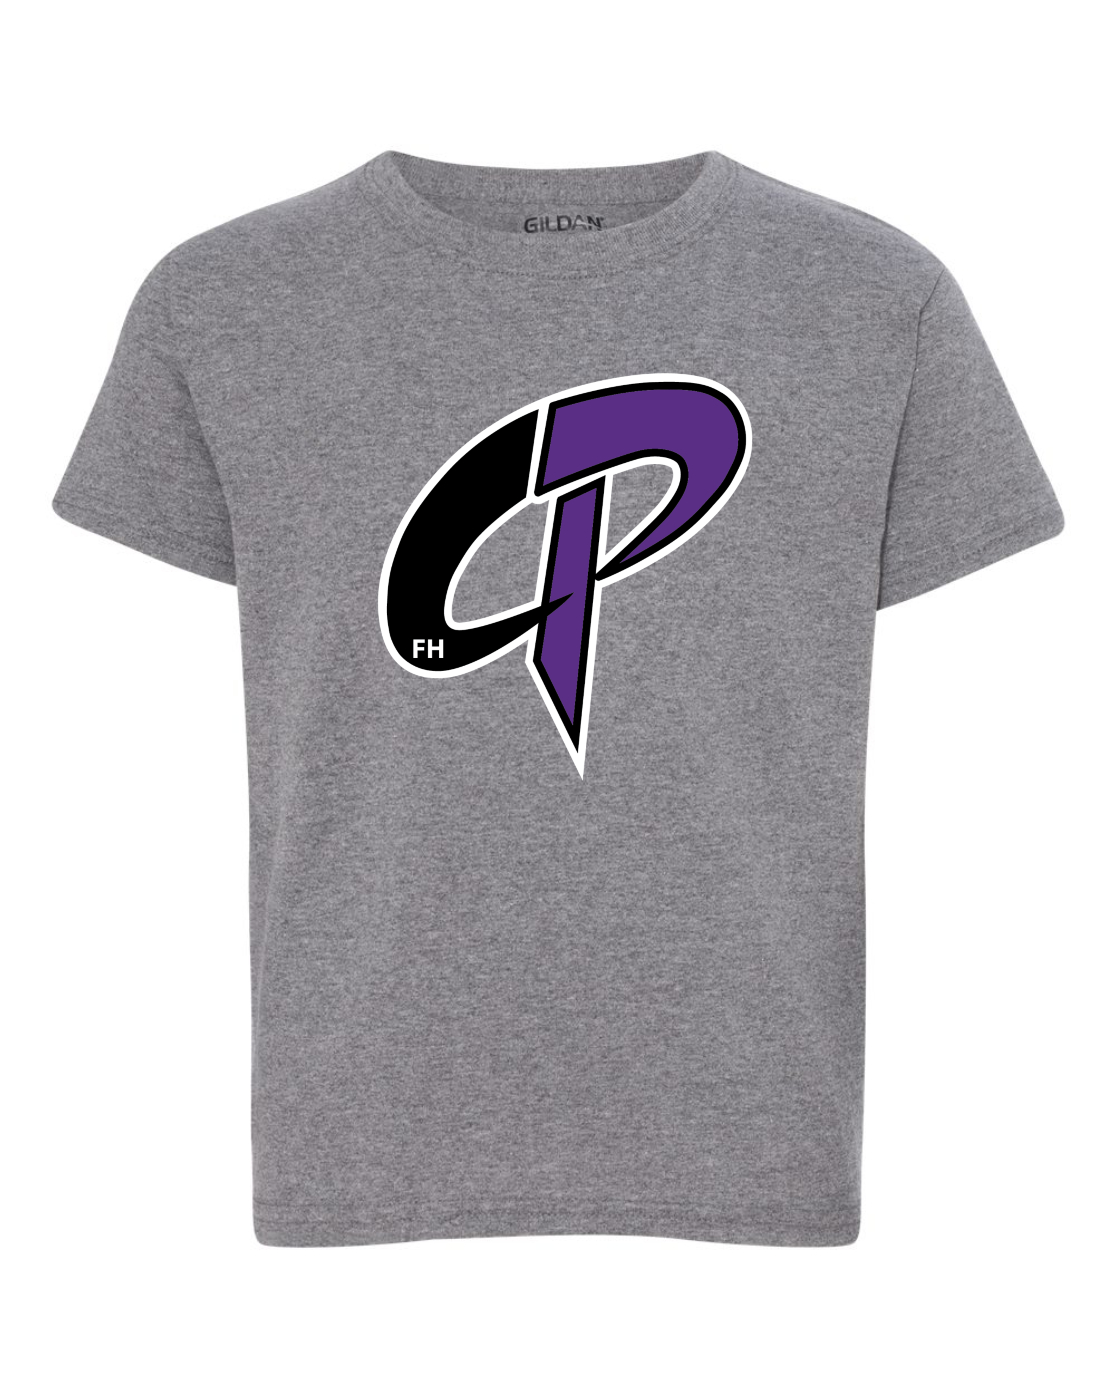 CPFH Standard Youth T-Shirt